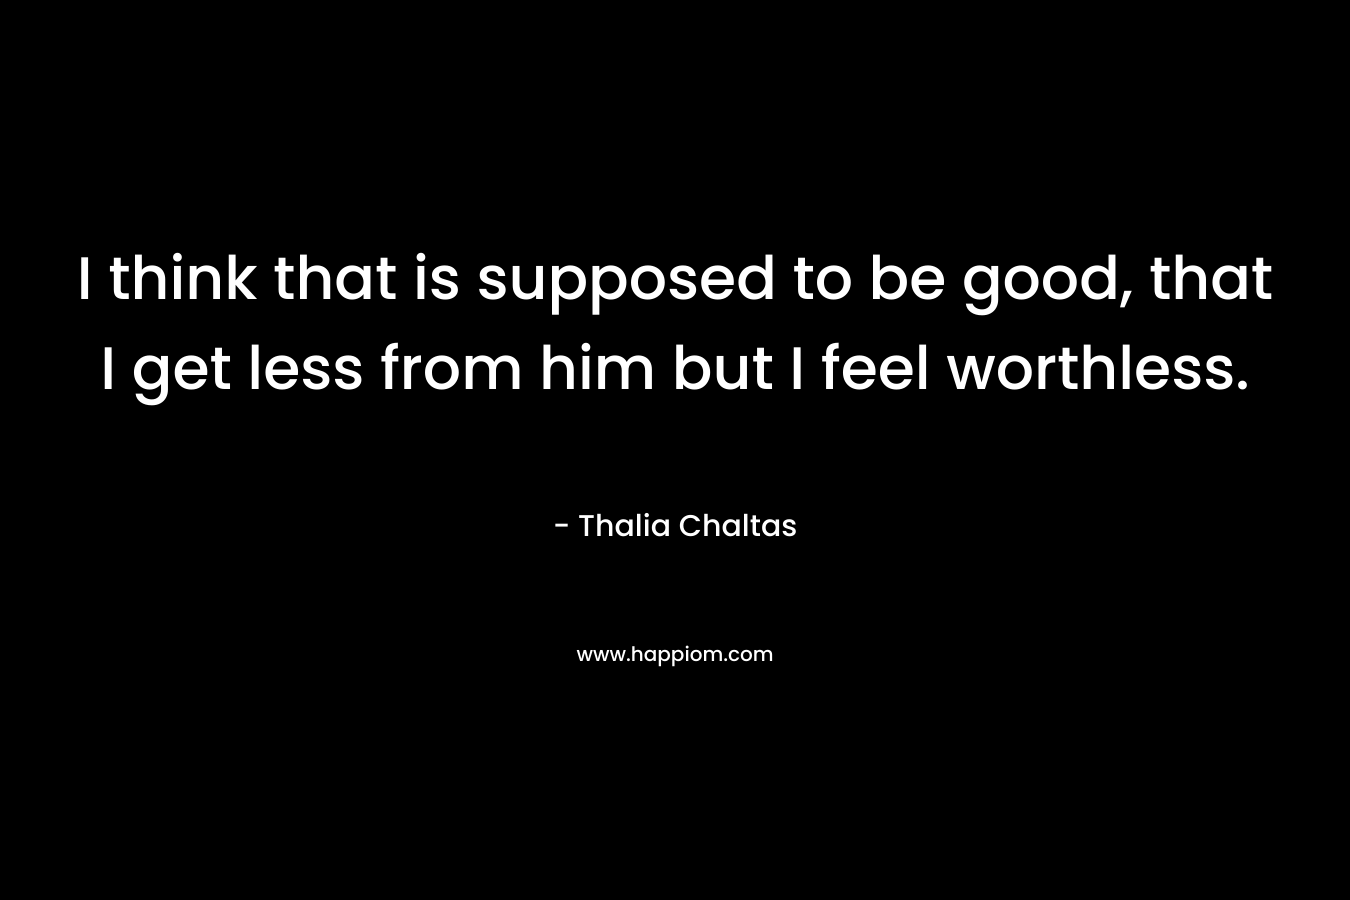 I think that is supposed to be good, that I get less from him but I feel worthless. – Thalia Chaltas